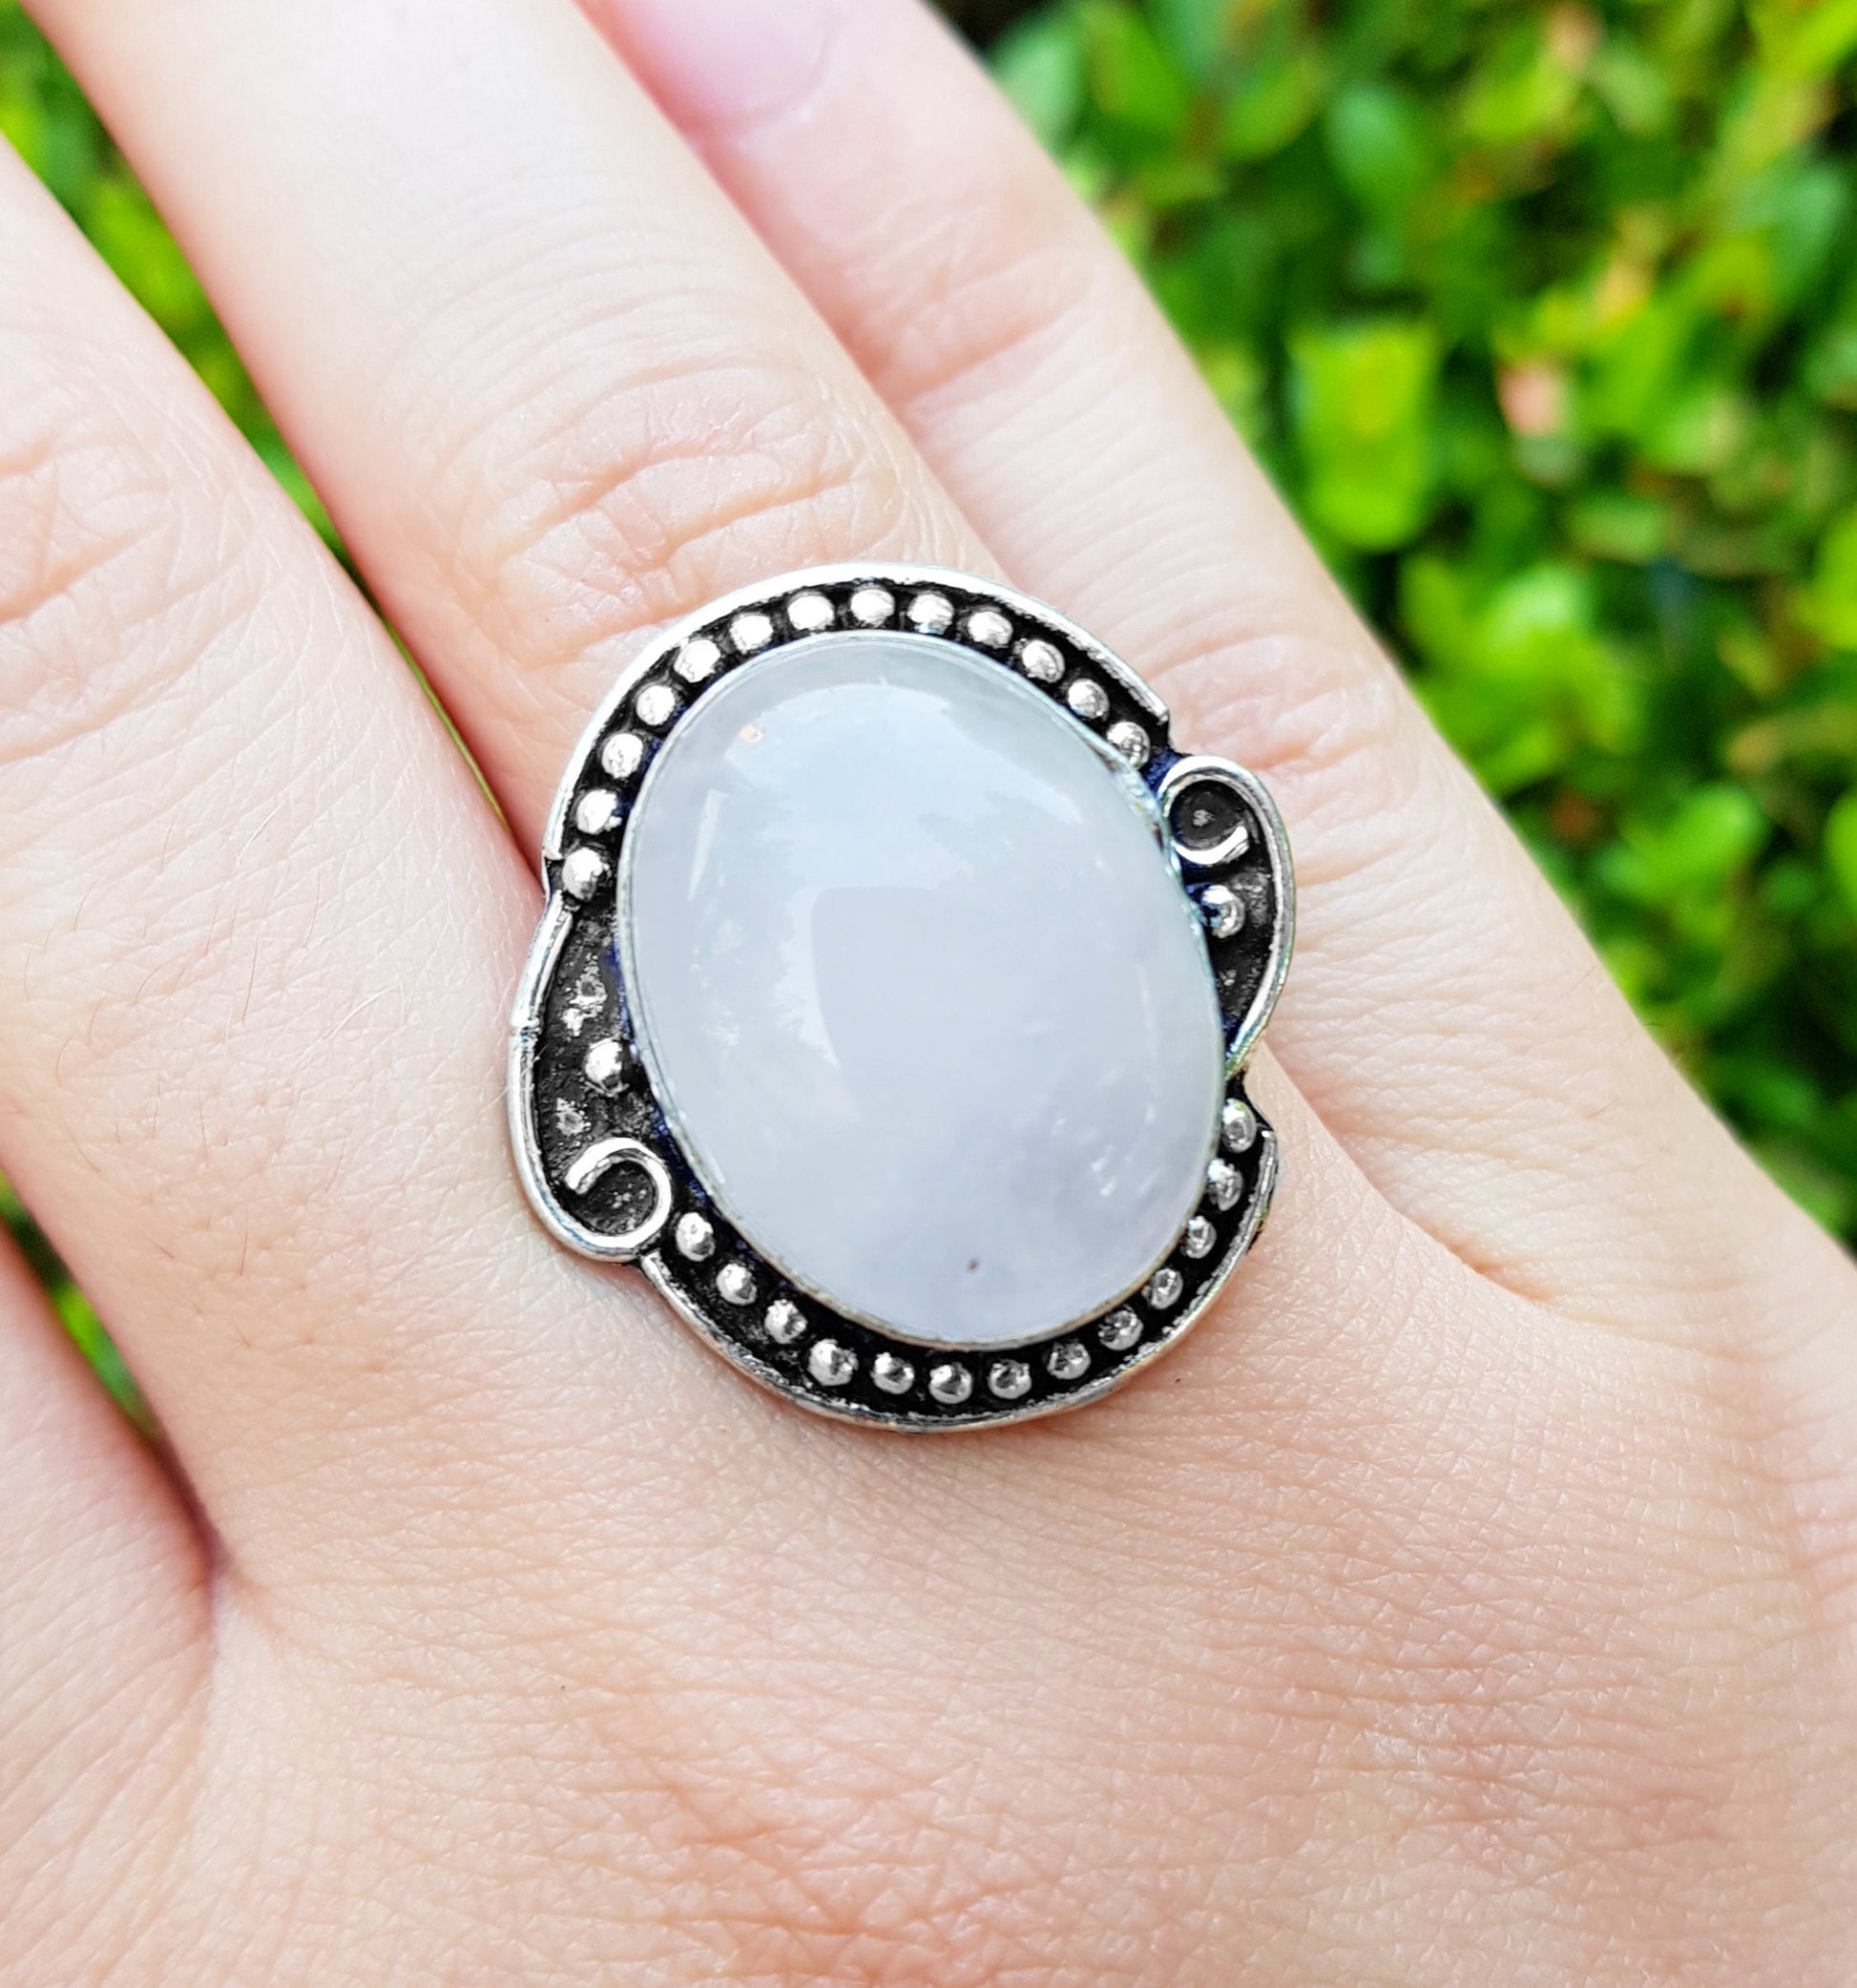 Pink Rose Quartz Gemstone Ring In Sterling Silver Size US 7 Big Statement Ring Boho Rings Square Ring Unique Gift For Her